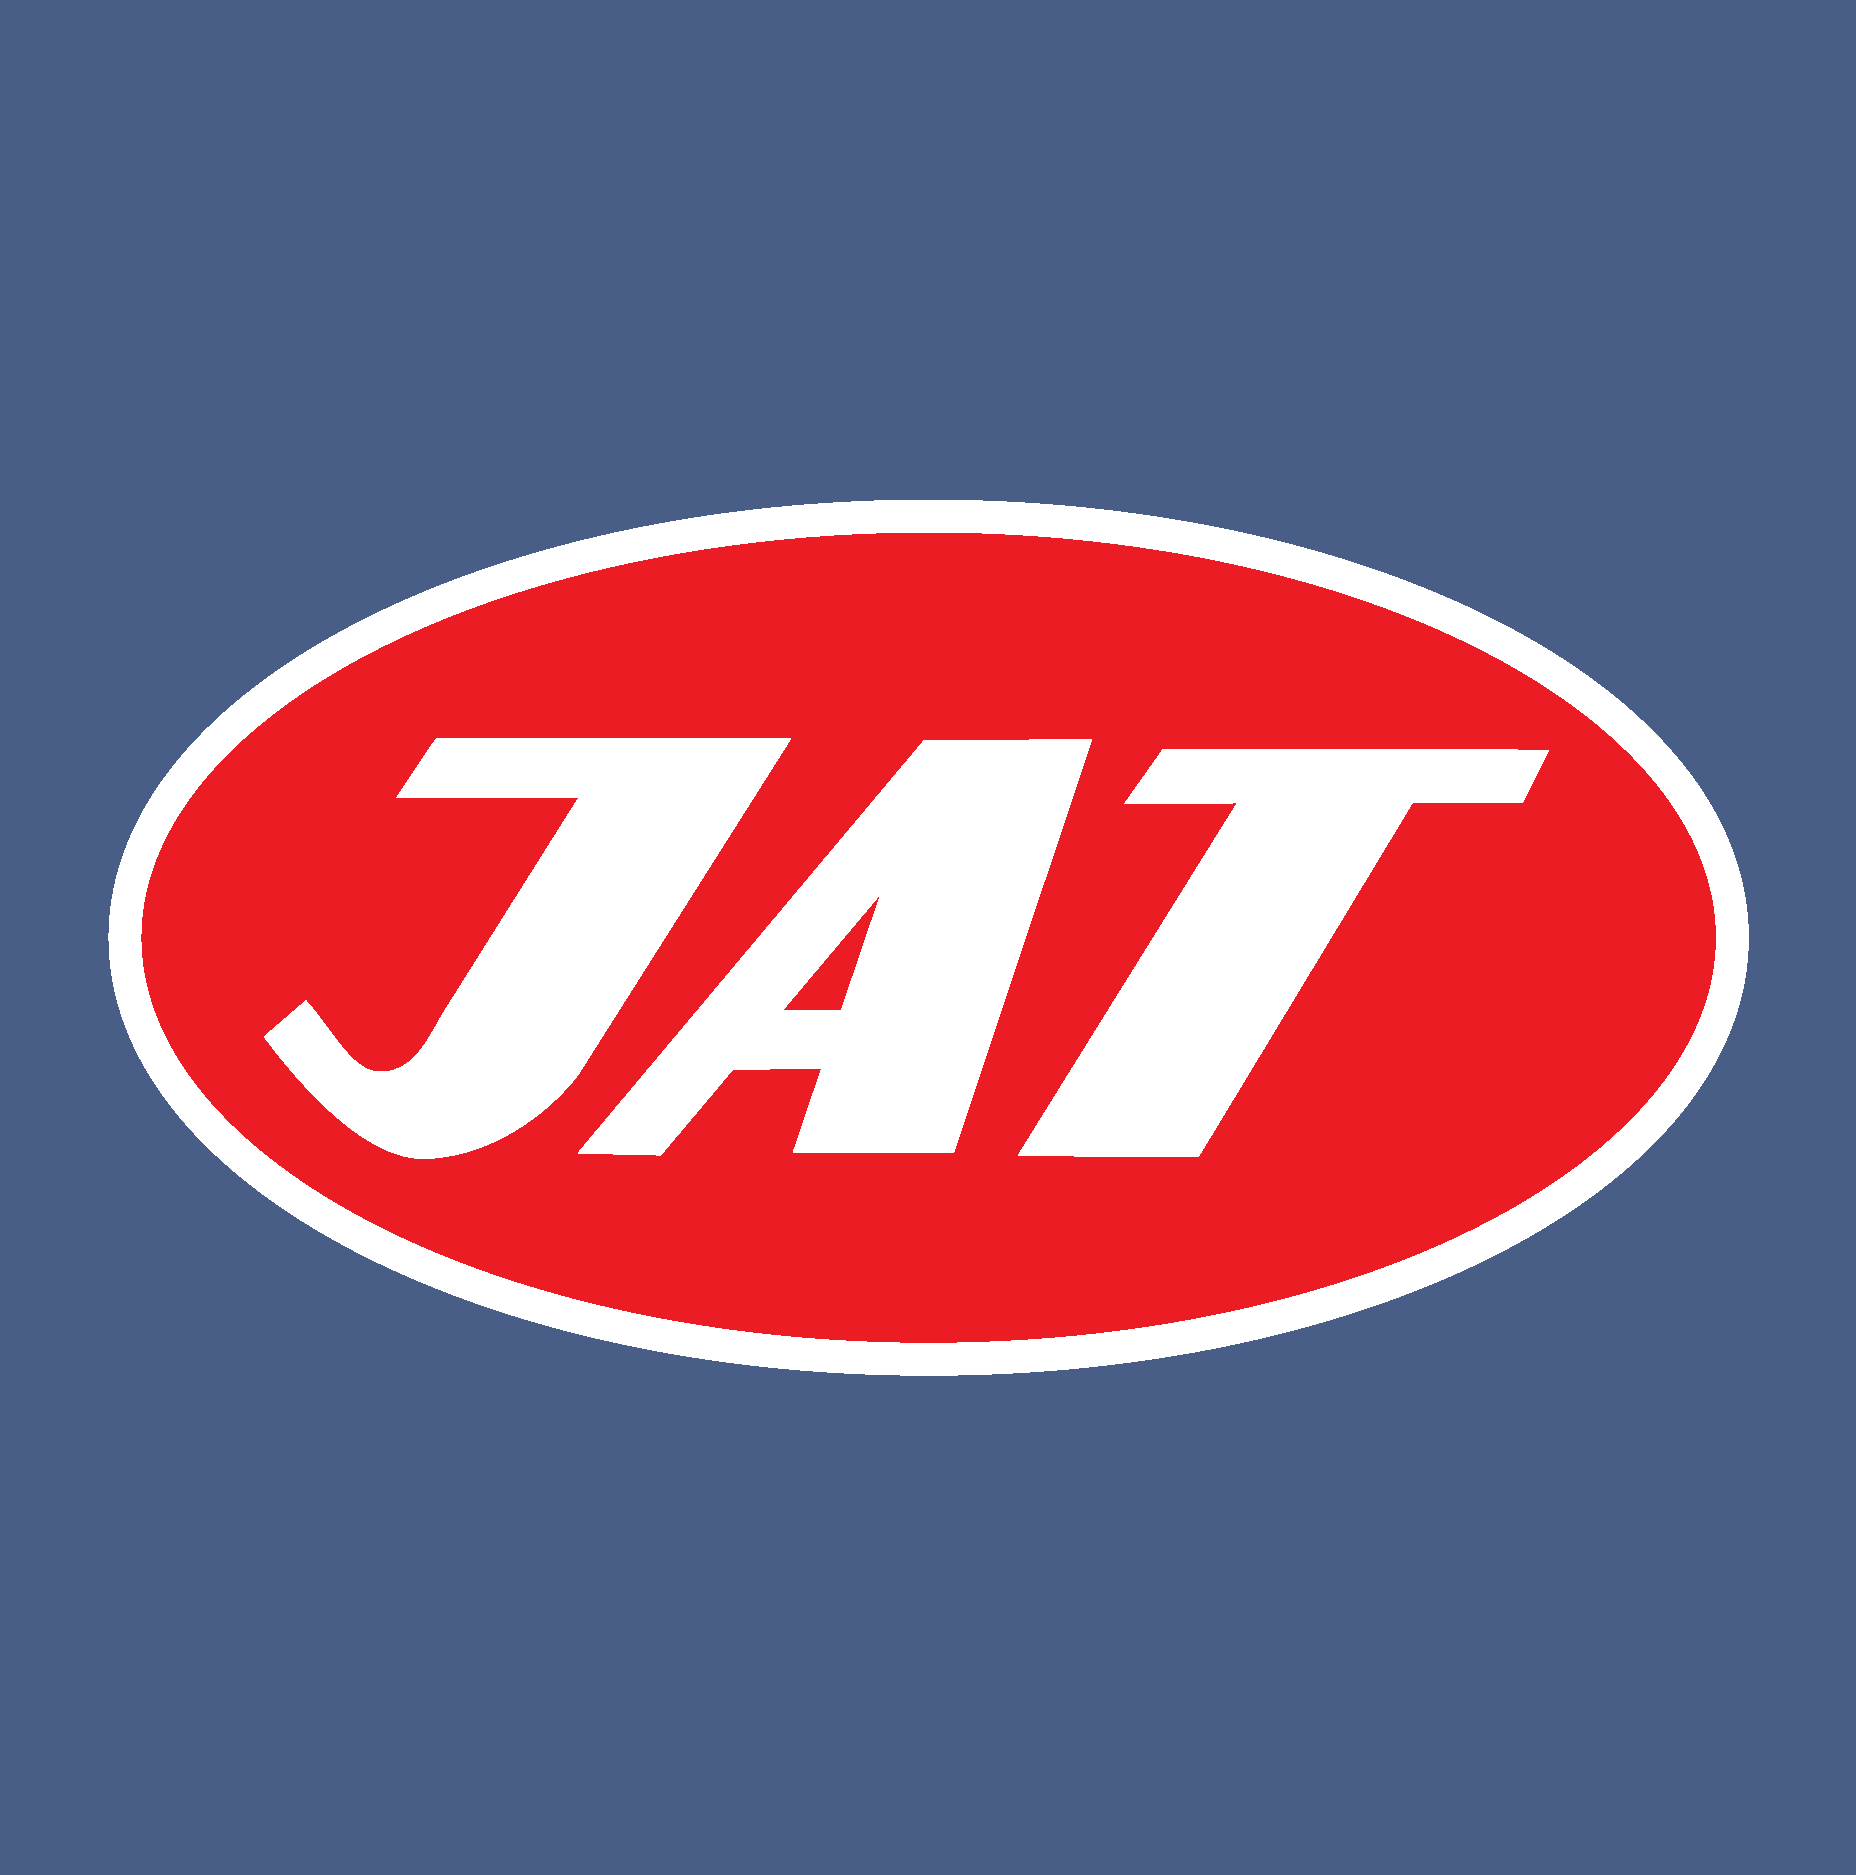 Jat Airways Logo, symbol, meaning, history, PNG, brand